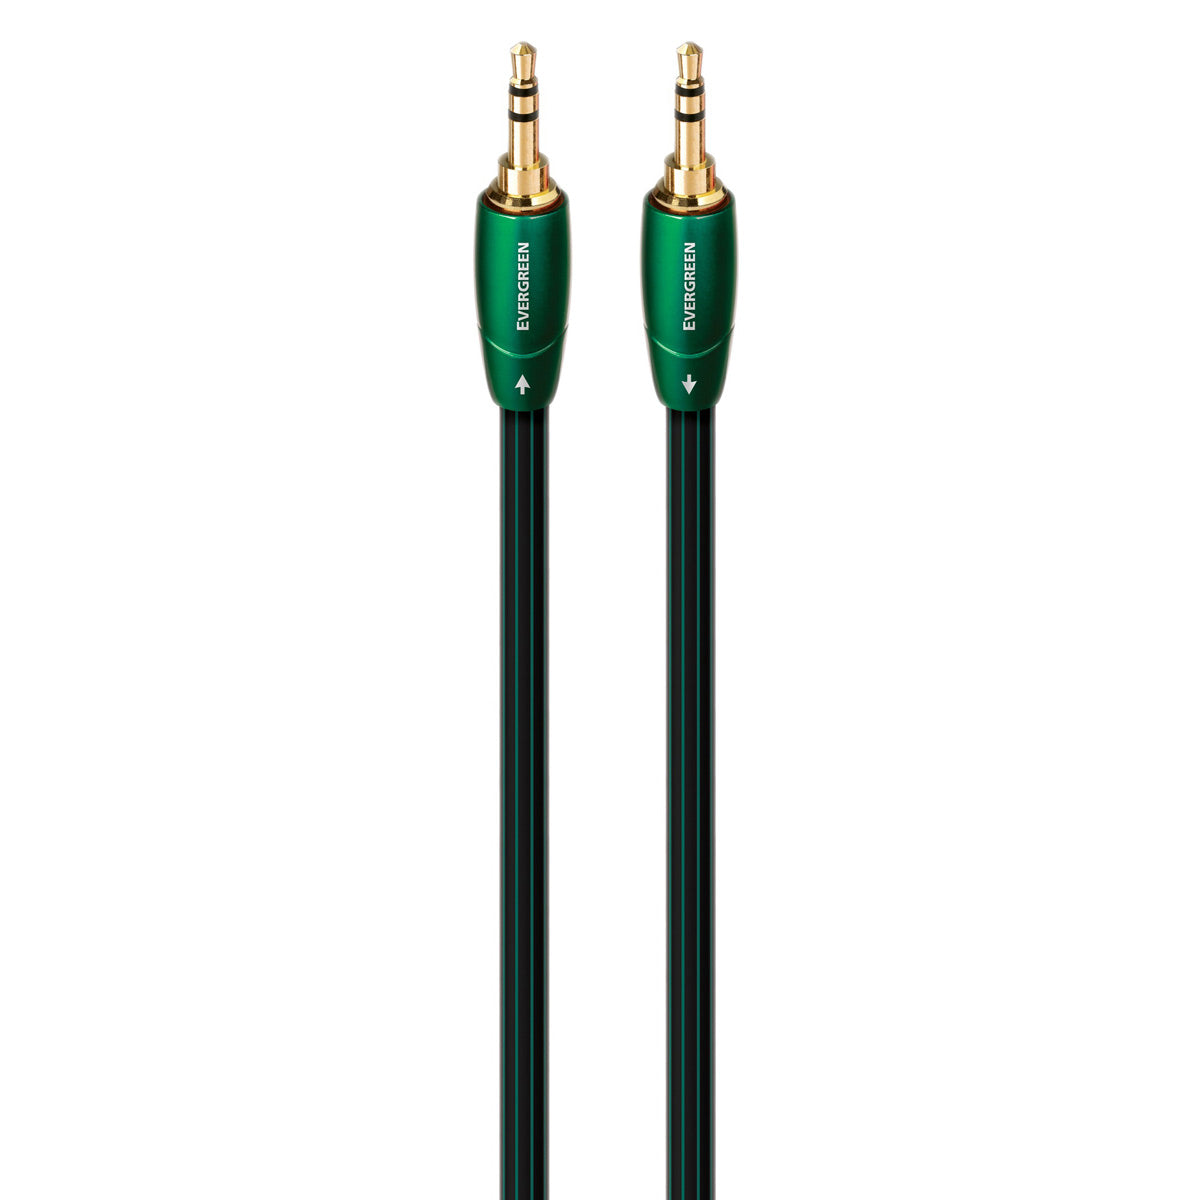 AudioQuest Evergreen 3.5mm Male to 3.5mm Male Cable - 3.28 ft. (1m)